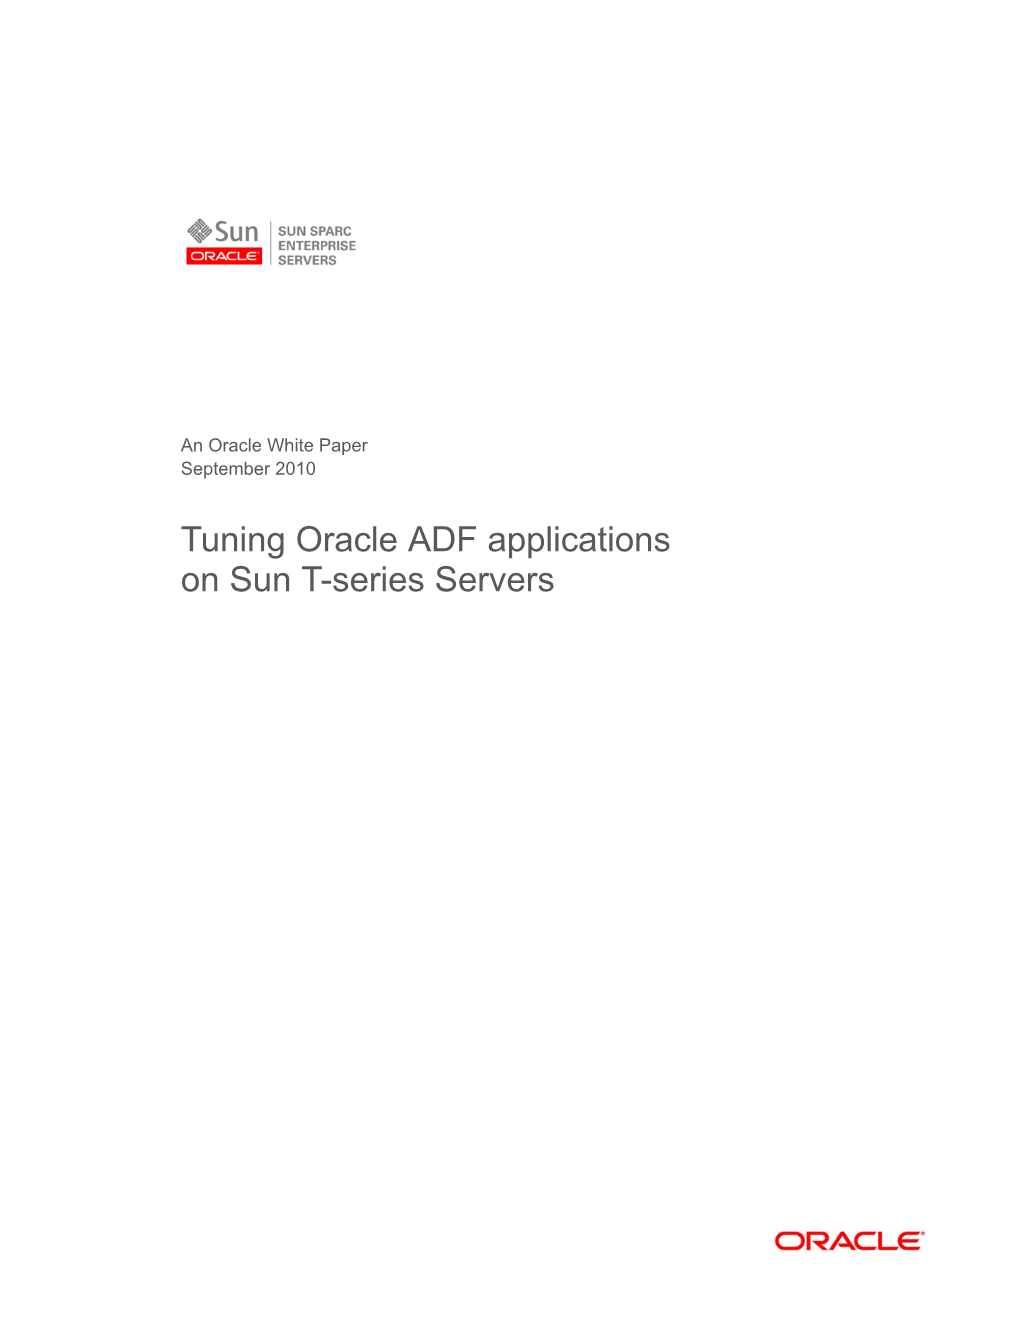 Tuning Oracle ADF Applications on Sun T-Series Servers Tuning Oracle ADF Applications on Sun T-Series Servers